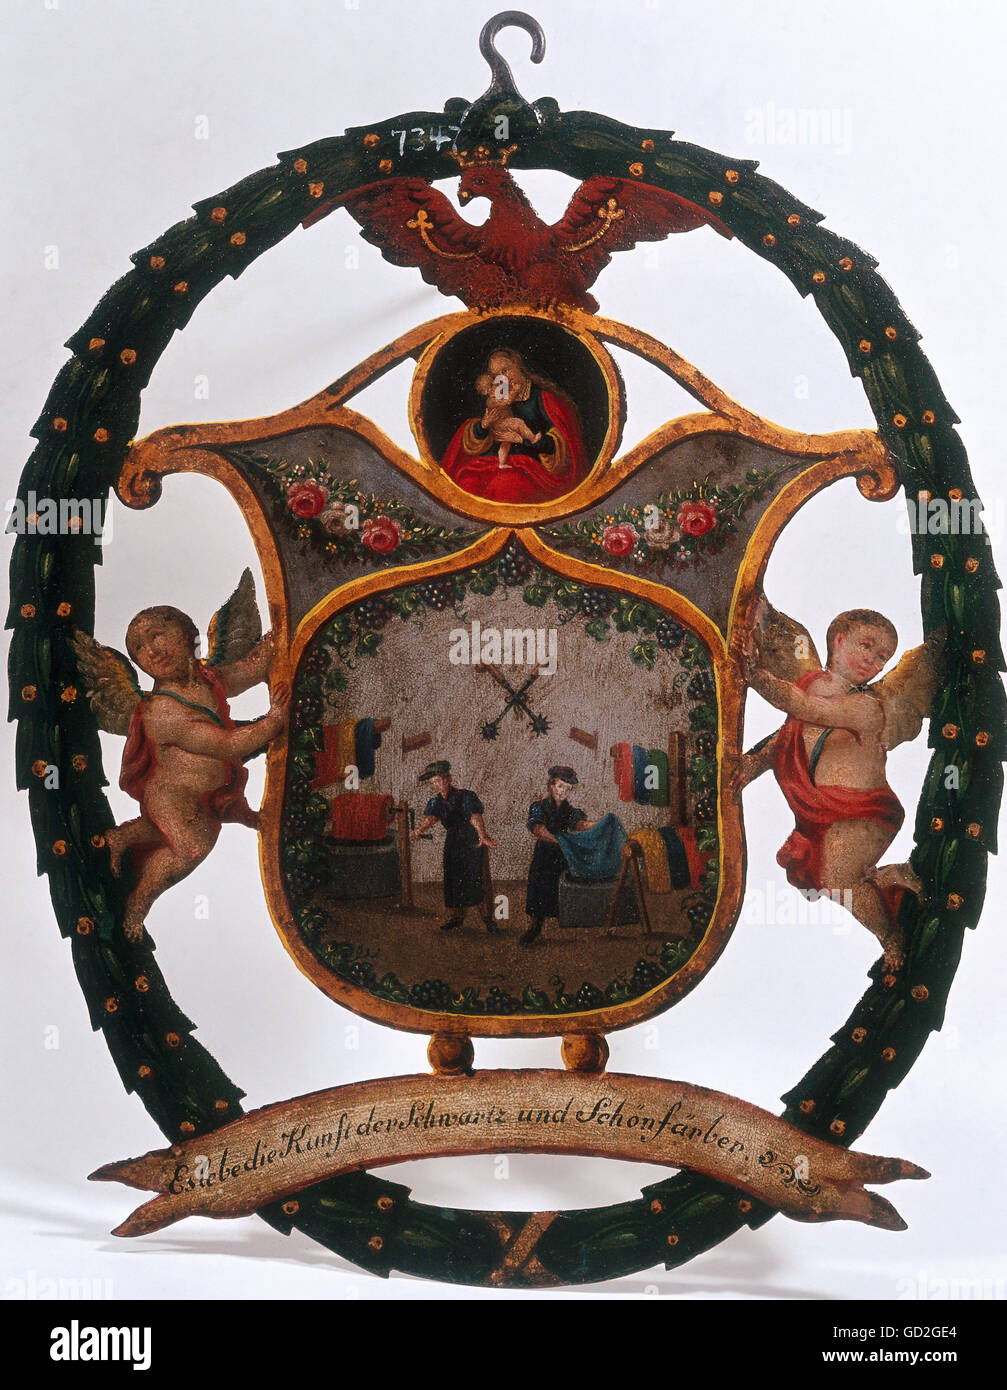 handicraft, guilds, guild symbol of the black dyers and palliators, Margraviate of Brandenburg, 18th century, guild, guilds, craftsman, craftsmen, craftsperson, craftspersons, craftspeople, tradesman, tradesmen, yer, people, men, man, working, work, labouring, laboring, labour, labor, colouring, coloring, fabric, fabrics, colour, color, colours, colors, Mark eagle, Prussia, Germany, historic, historical, argraviate of Brandenburg, Additional-Rights-Clearences-Not Available Stock Photo